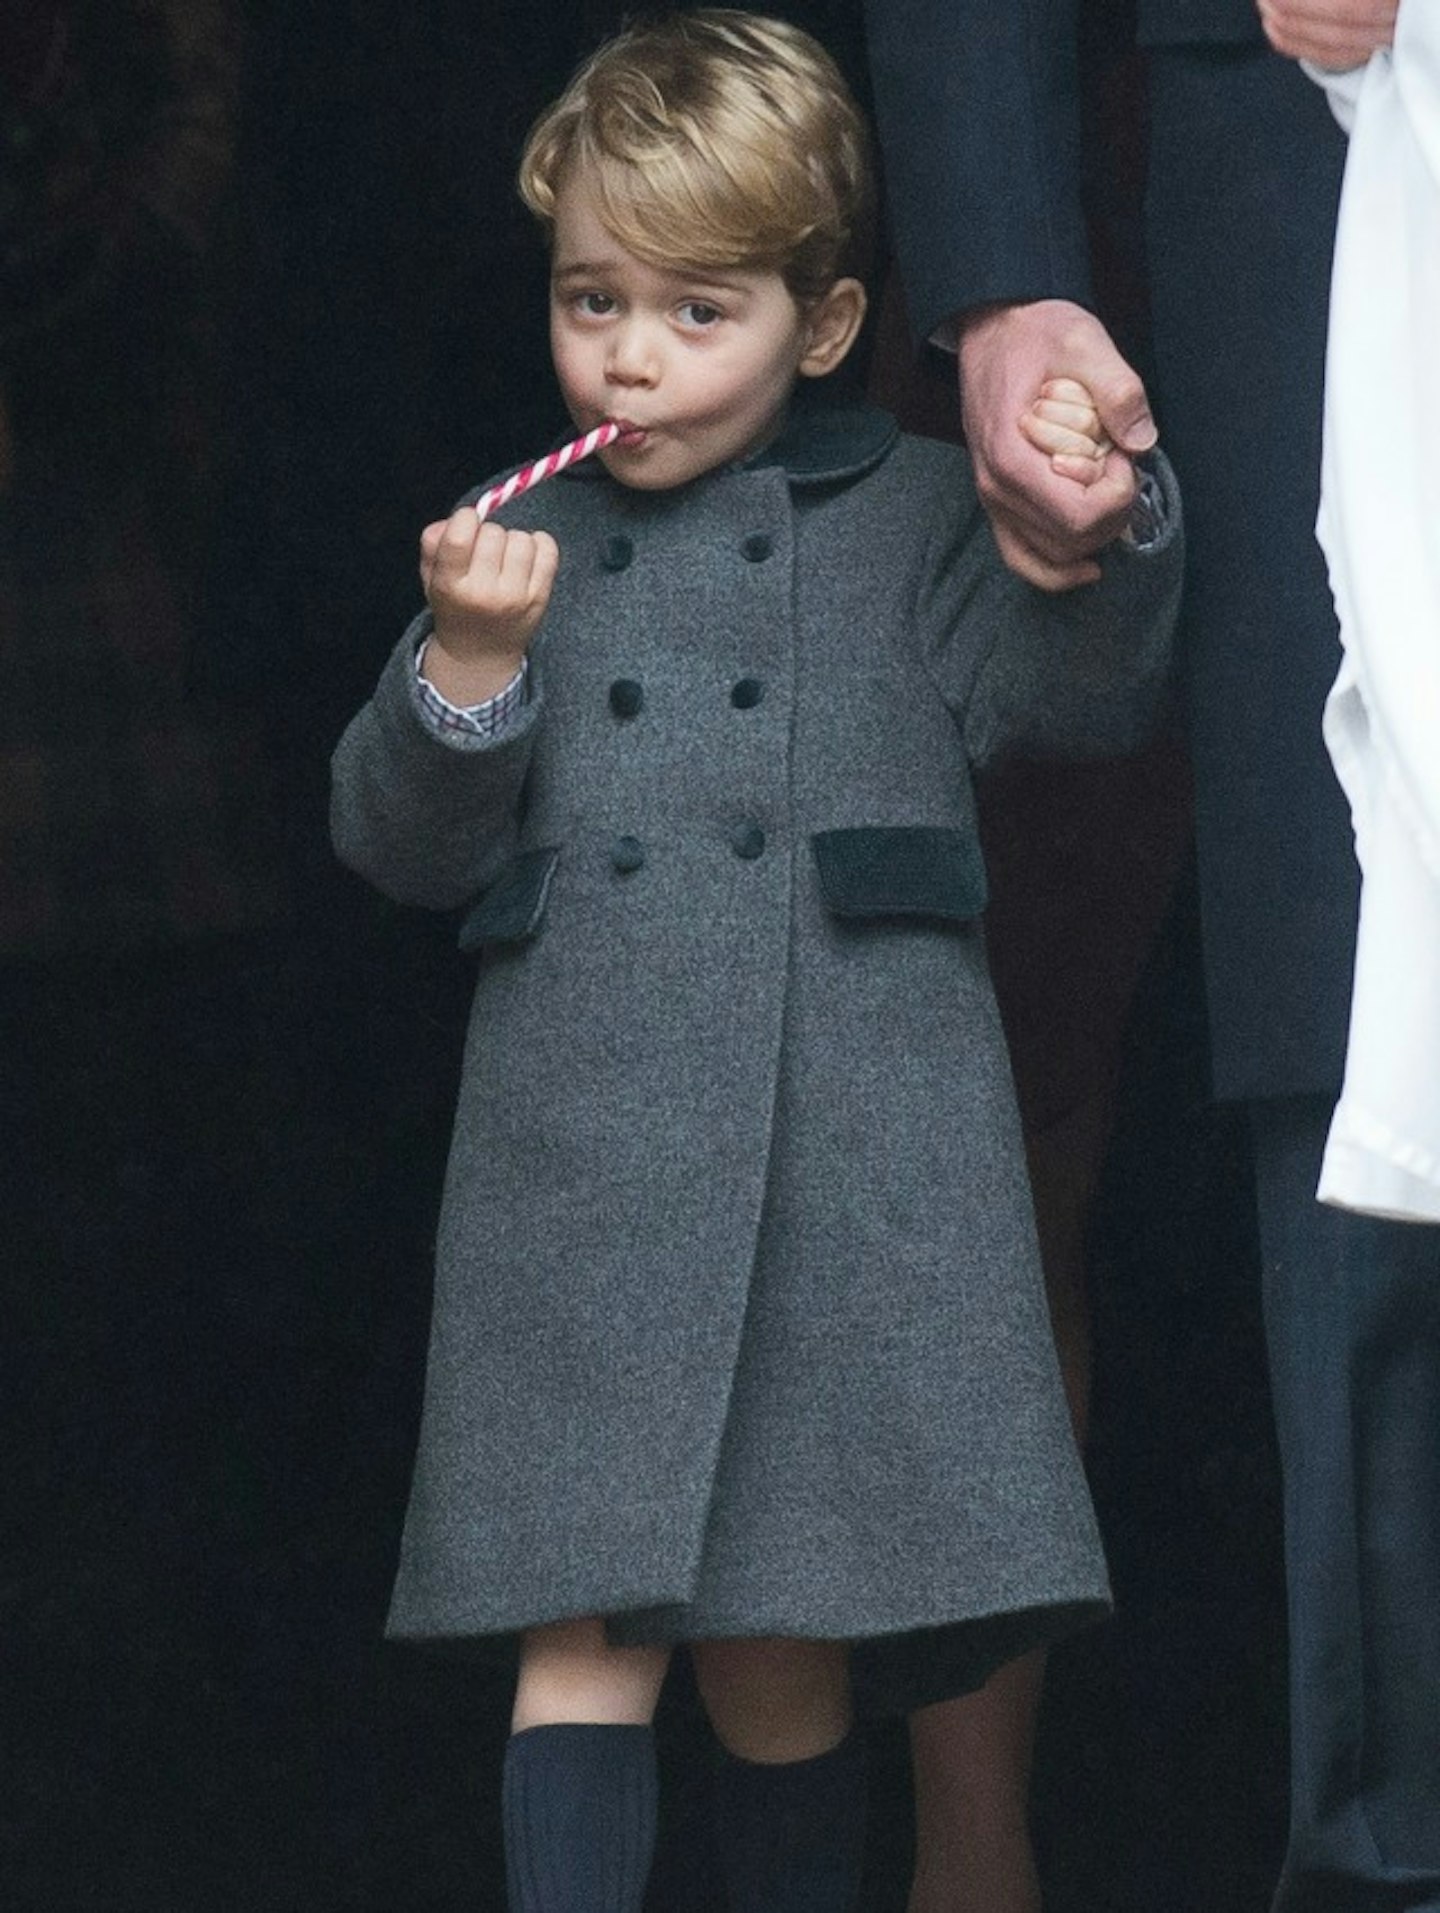 Prince George with a candy cane